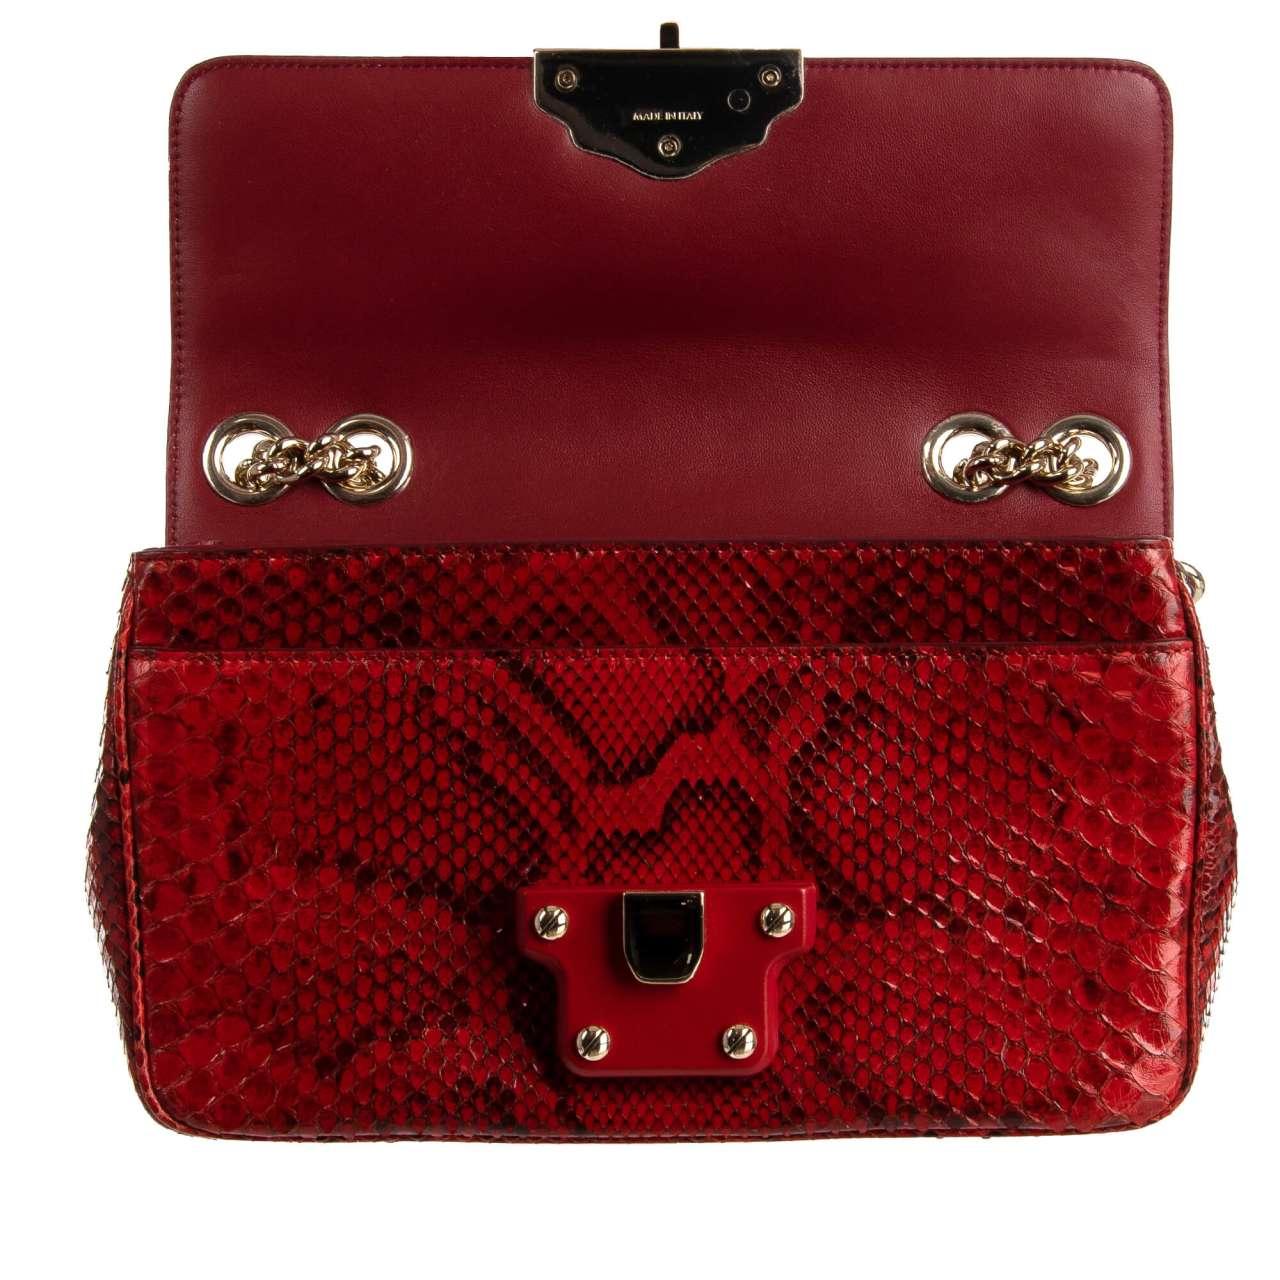 D&G Croco Snake Leather Shoulder Bag LUCIA with Chain Strap Red Purple For Sale 2